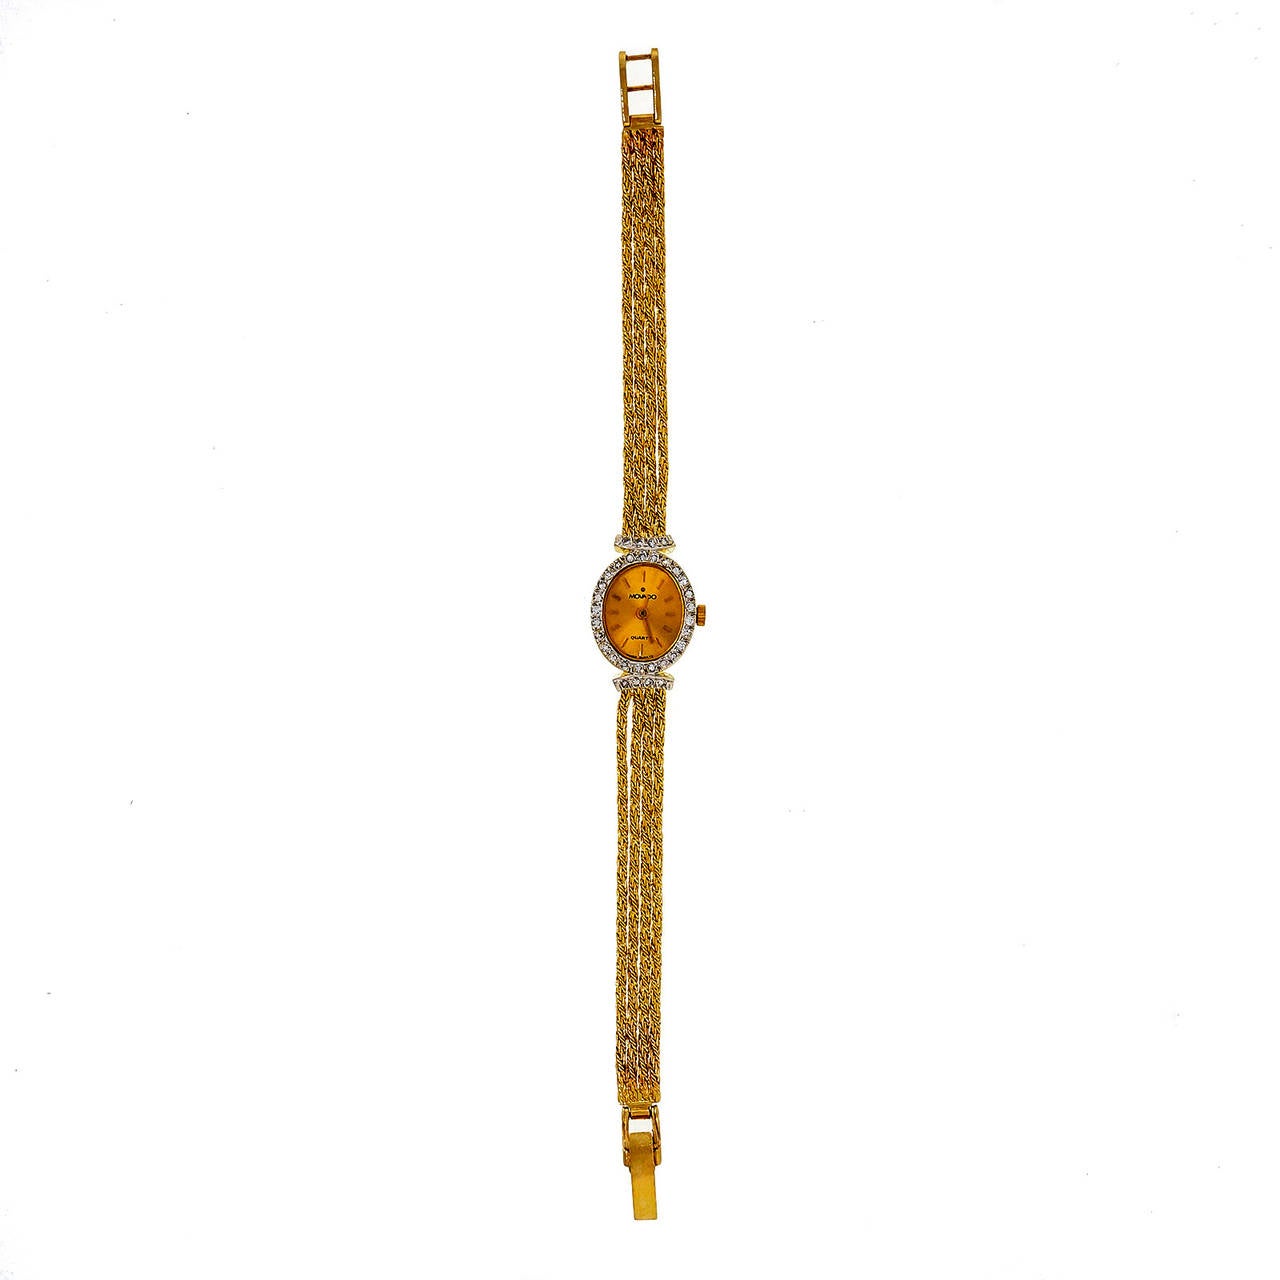 Movado Lady's 14k Yellow Gold and Diamond Wristwatch with Quartz Movement.

14k yellow gold
Bracelet length: 6.25 inches
Length: 21.62mm
Width: 14.6
Braclet width at case: 7mm
Bracelet: 4 strands 14k gold Movado Buckle
Case thickness: